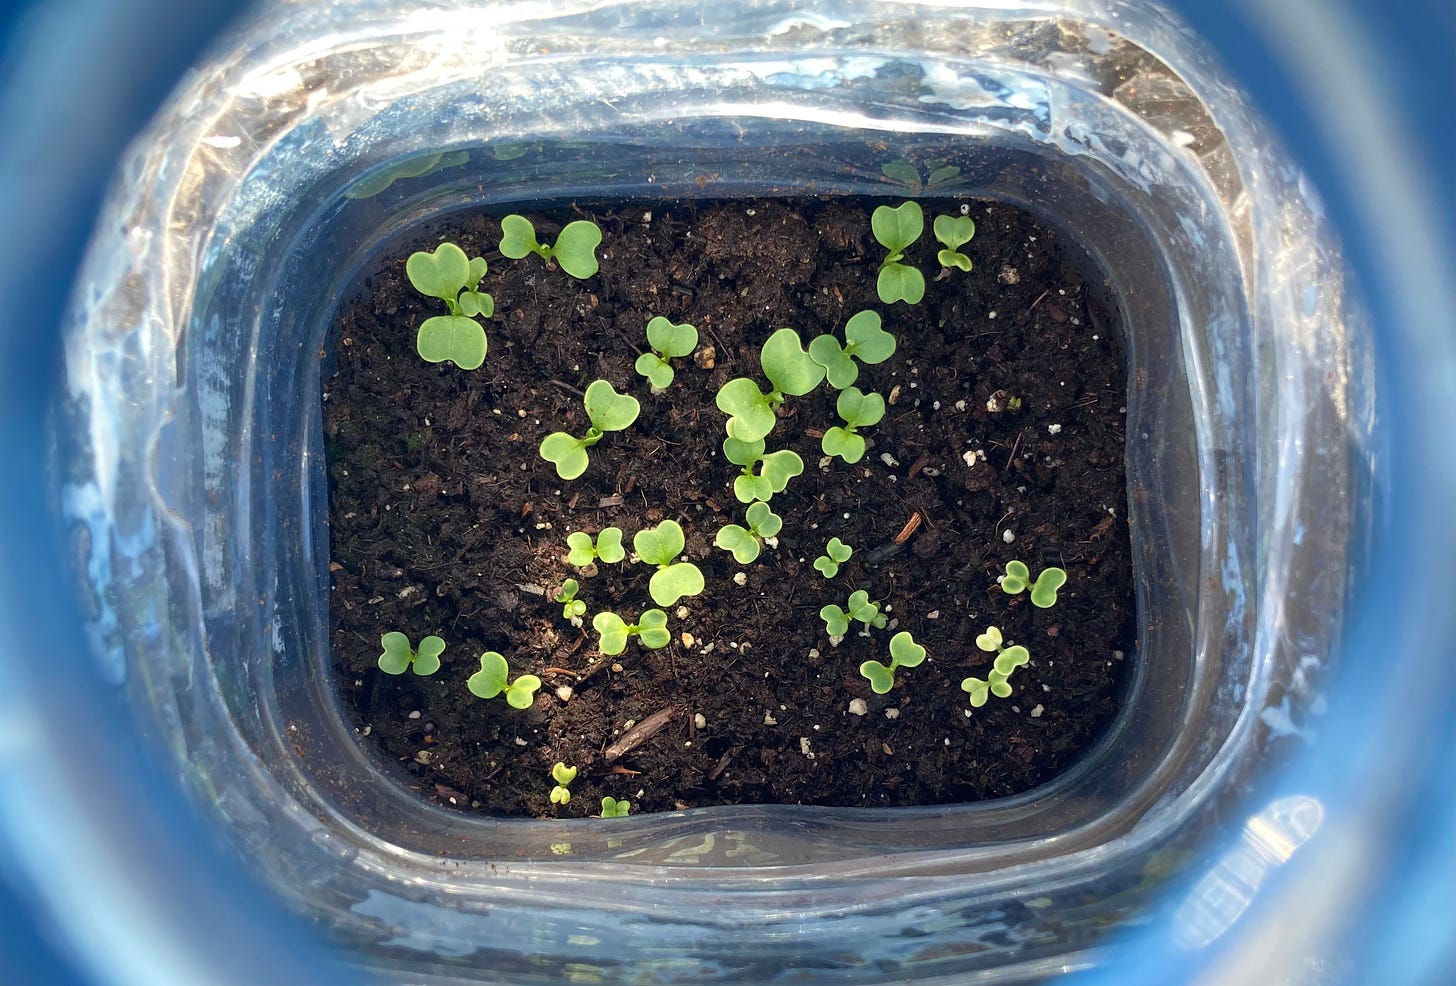 through the opening of a blue plastic bottle, some plants with two seed leaves sprouting.